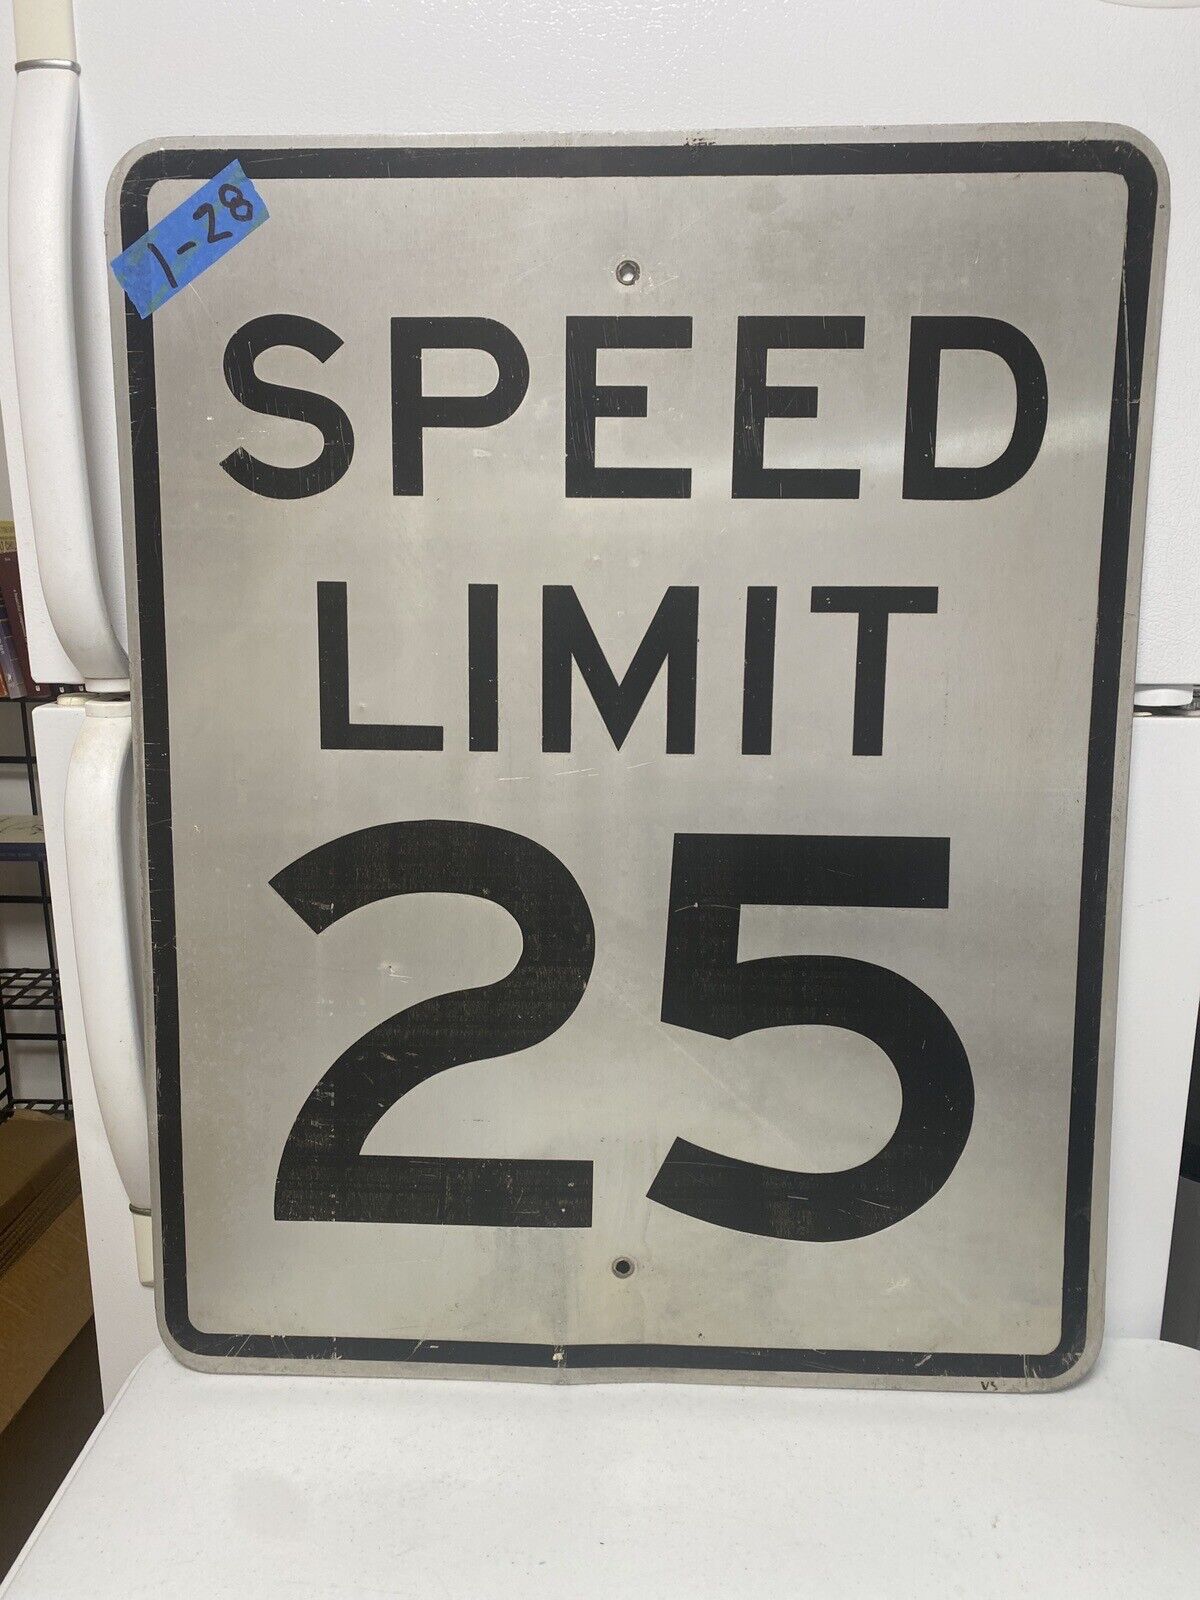 Retired Authentic Road Street Sign (Speed Limit 25) 30